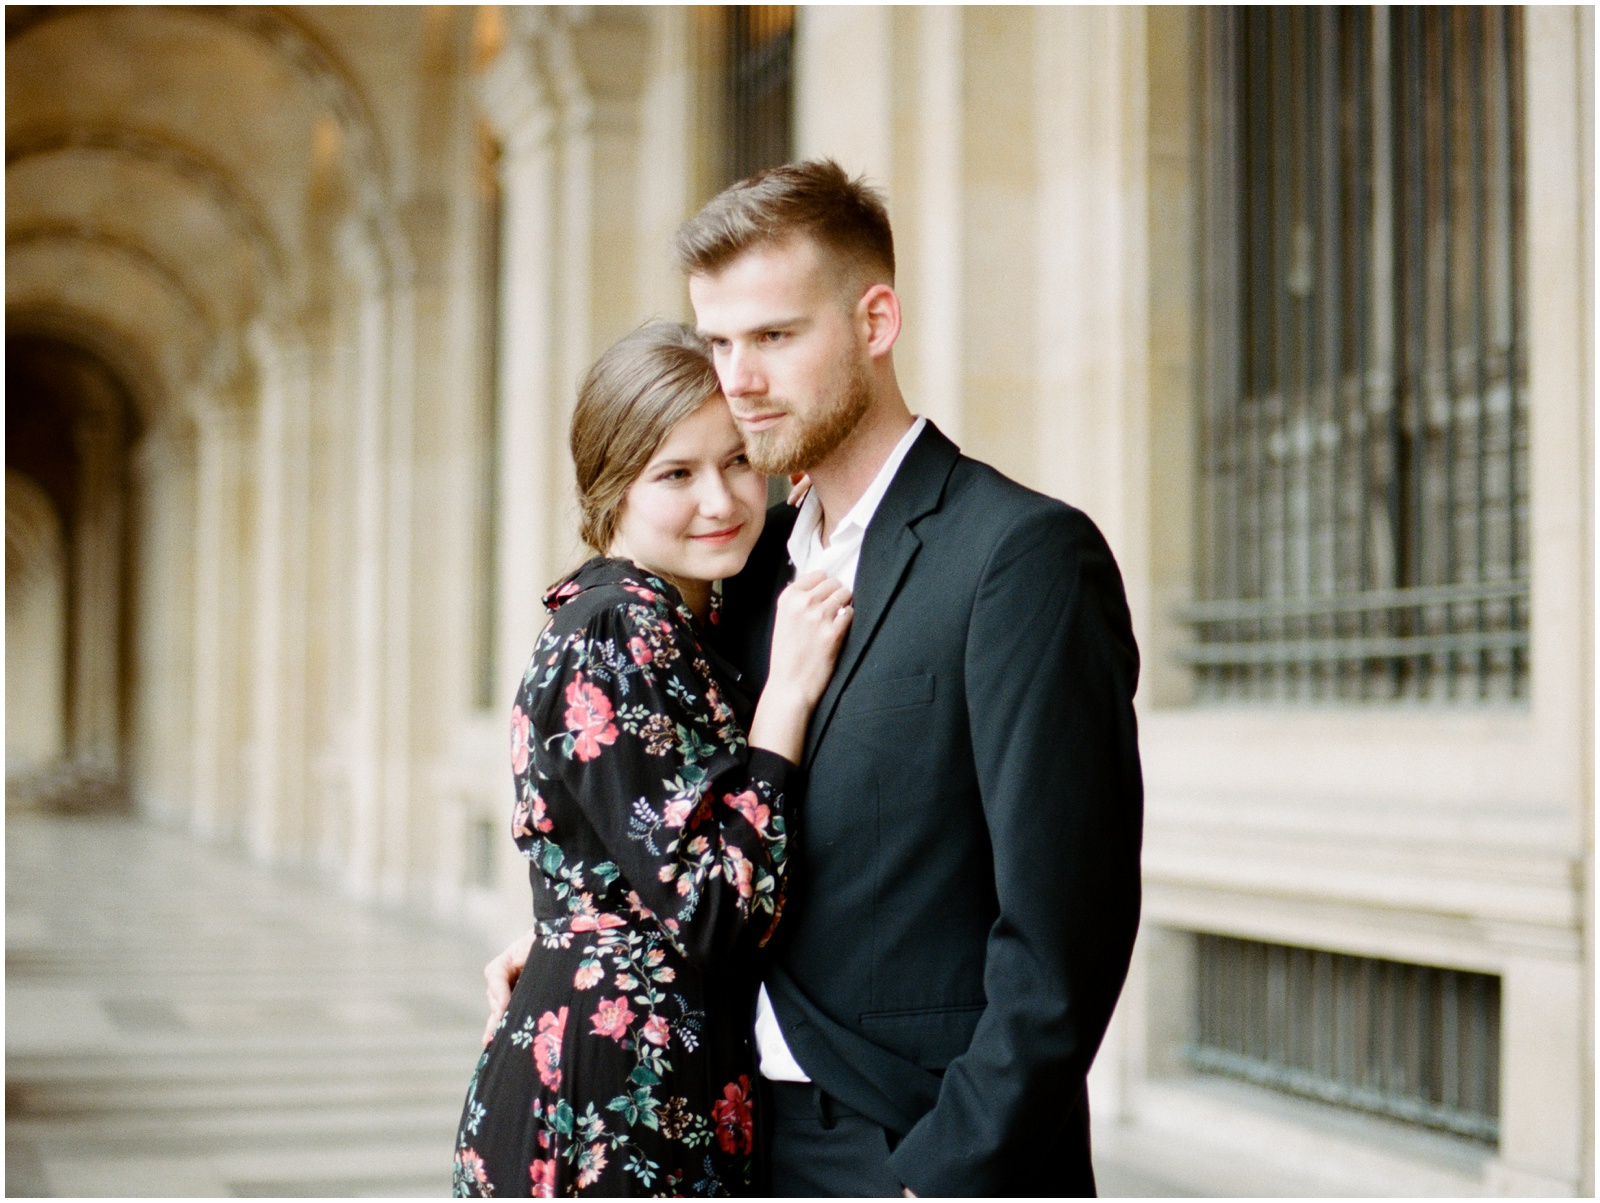 couple wearing elegant black outfits at Louvre Museum for photo shoot